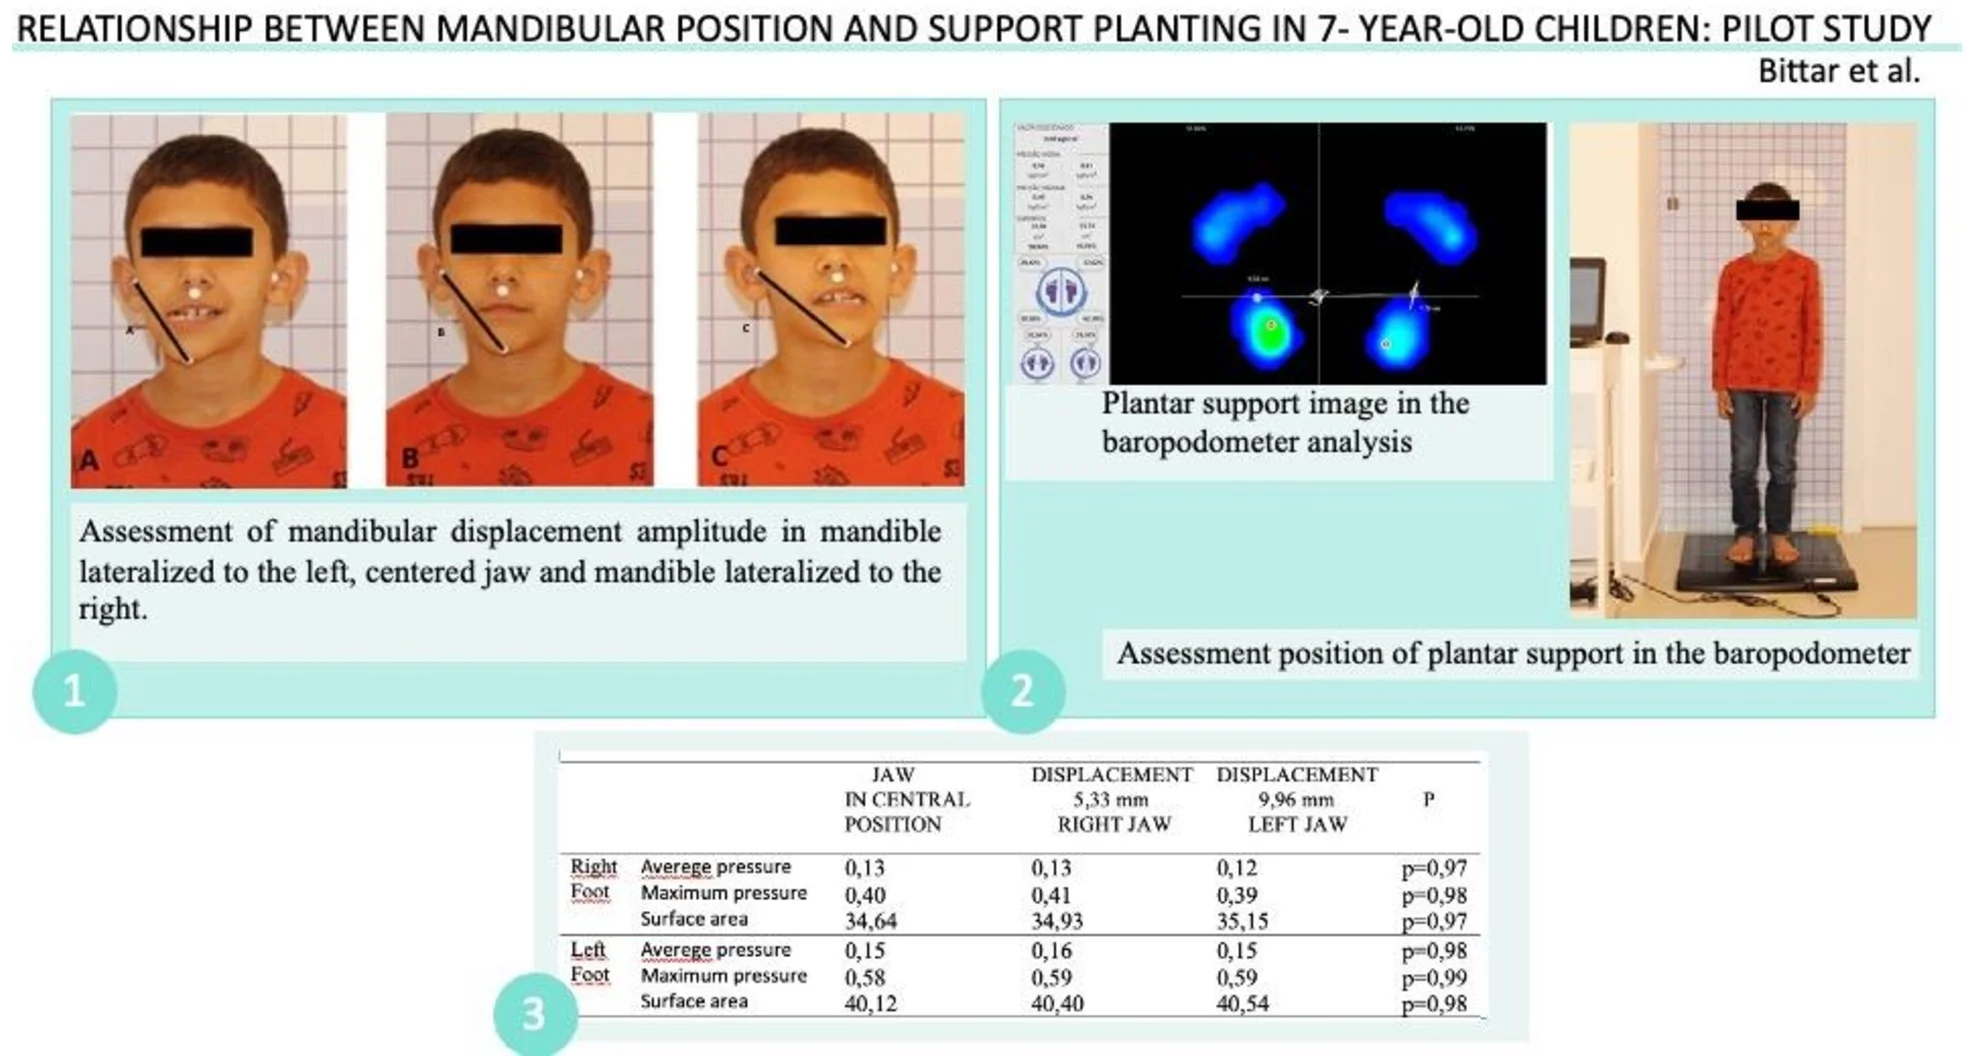 Relationship between mandibular position and support planting in 7-year-old children: pilot study